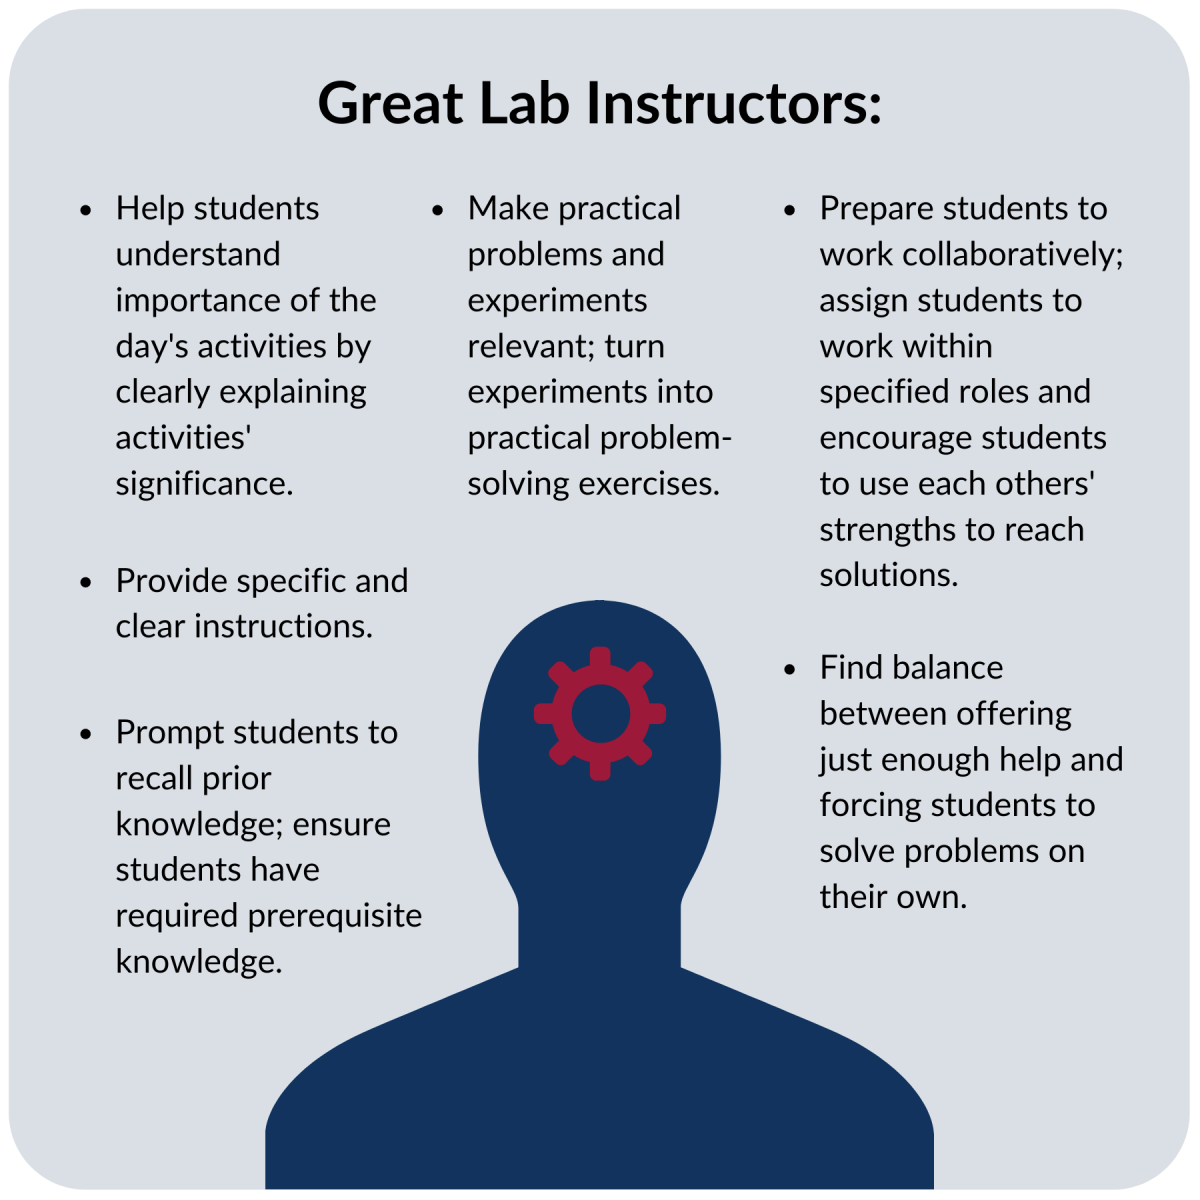 "Under all the text is a silhouette of a head with a gear in it. This is the text: Great lab instructors: help students understand the importance of the day's activities by clearly explaining activities' significance; make practical problems and experiments relevant and turn experiments into practical problem-solving exercises; prepare students to work collaboratively, assigning students to work within specified roles and encouraging students to use each others' strengths to reach solutions; provide specific and clear instructions; prompt students to recall prior knowledge, ensuring students have required prerequisite knowledge; and find balance between offering just enough help and forcing students to solve problems on their own."